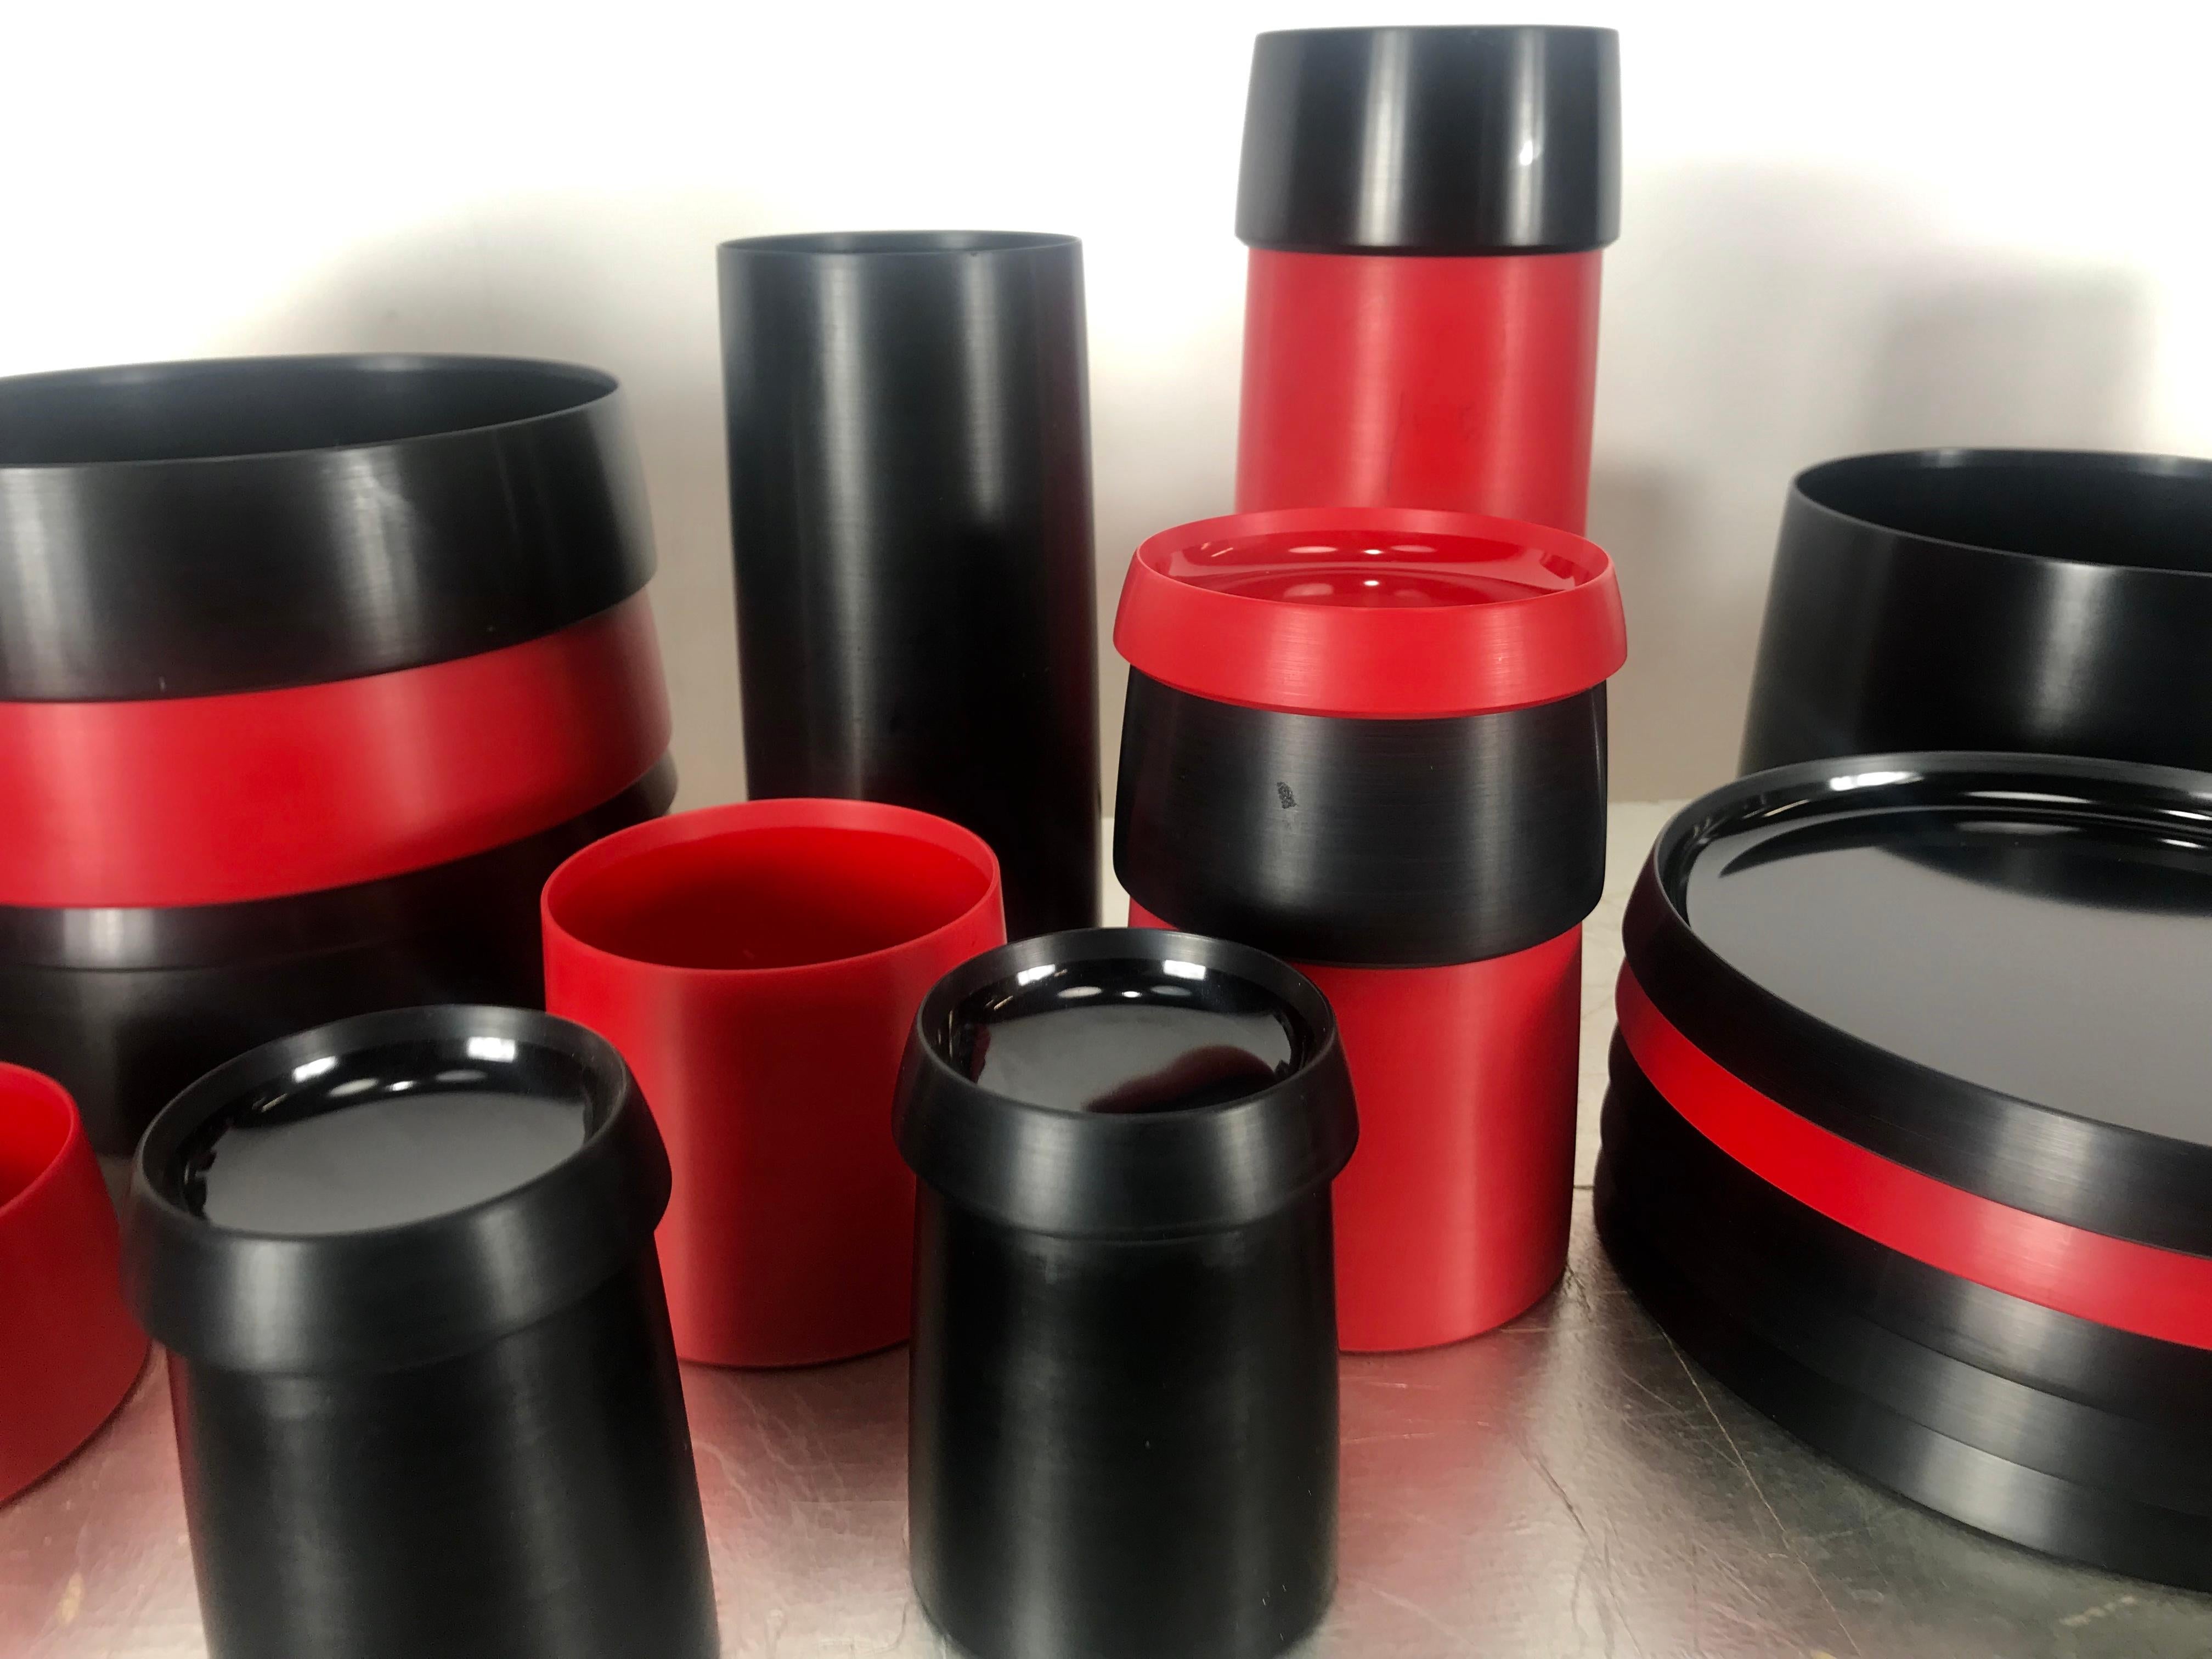 Ellusive Plastik, Skale 34 piece tableware, Torben Orskov, 1953 Denmark. No longer in production,. Stunning set, red and black bakelite, consisting of bowls, cups, plates, containers, lids etc. Ingenious stackable design, Form elegant table setting,